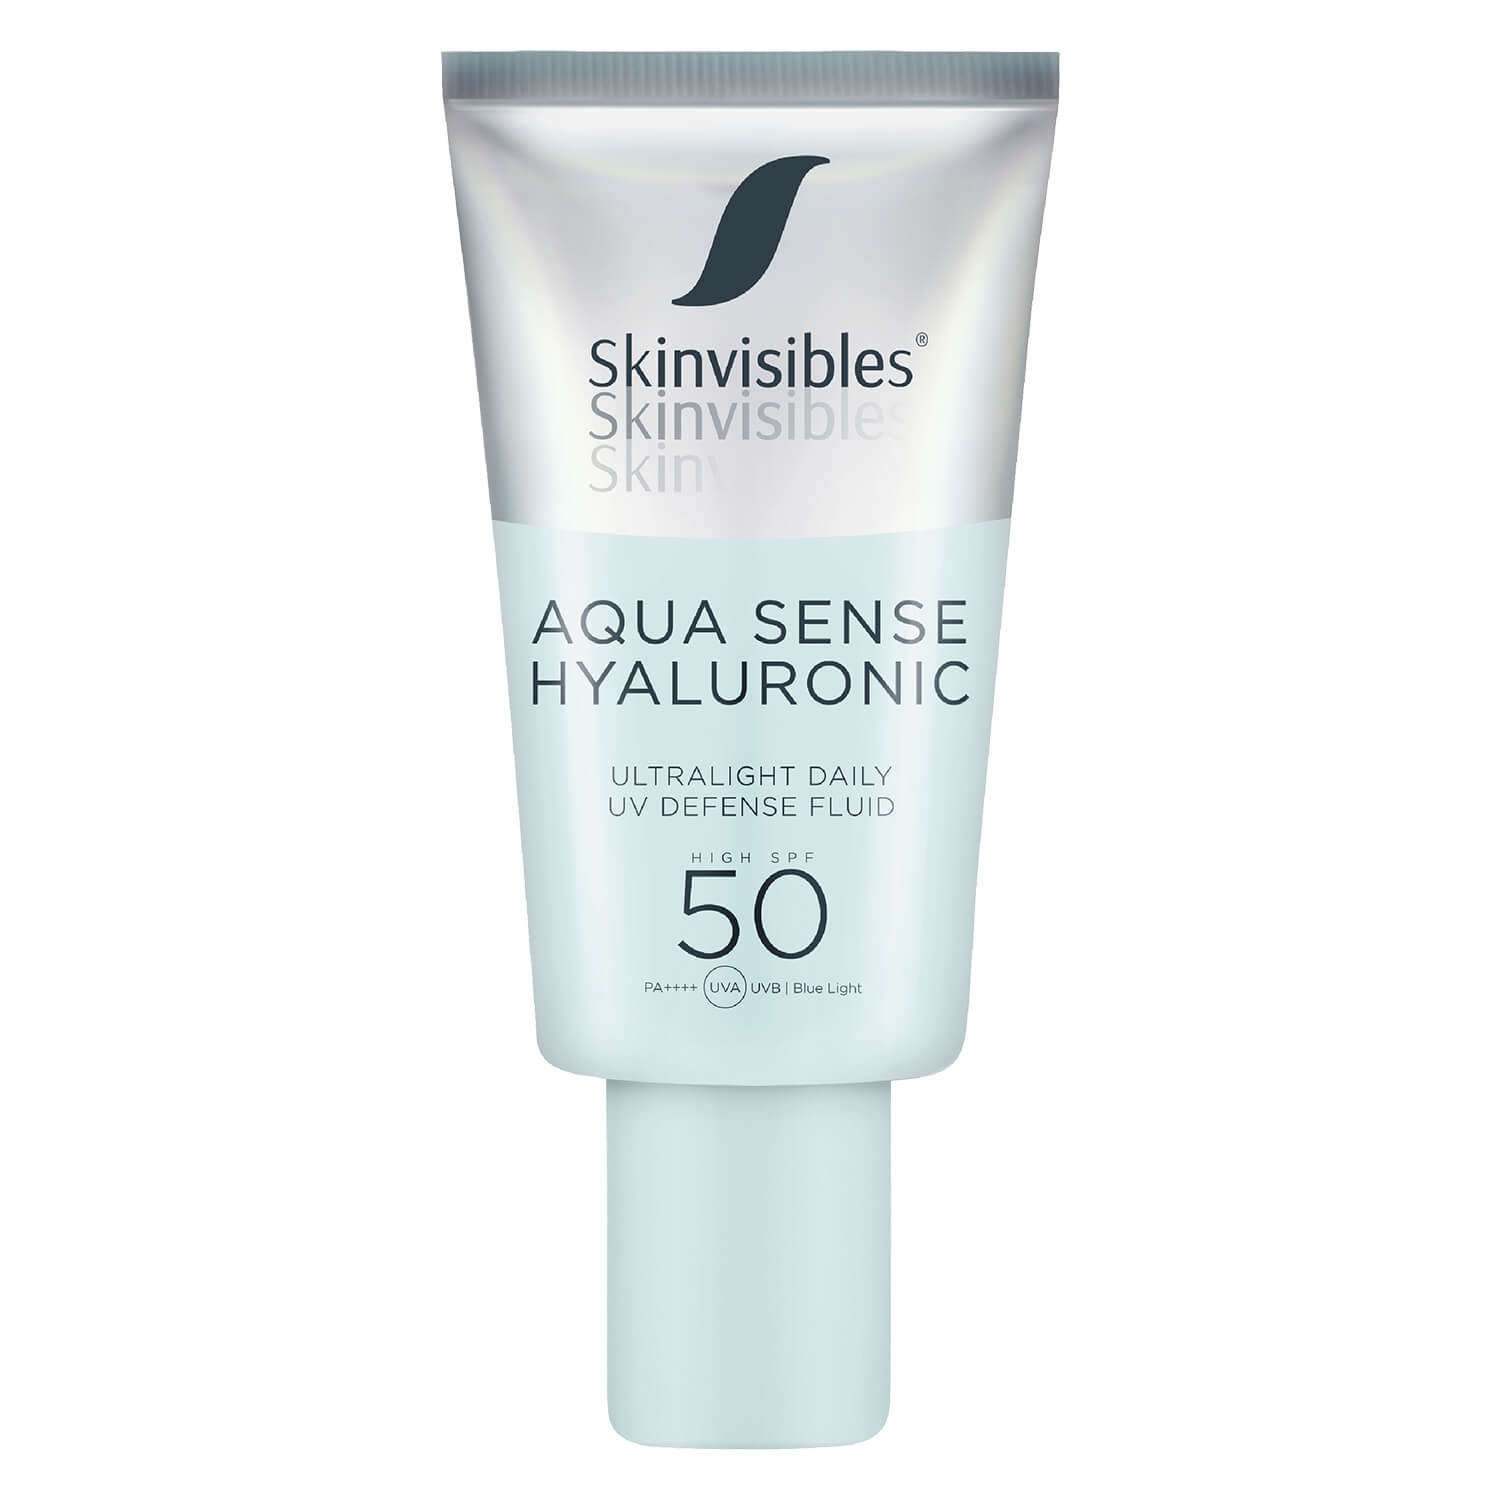 Product image from Skinvisibles - Aqua Sense Hyaluronic Fluid SPF 50